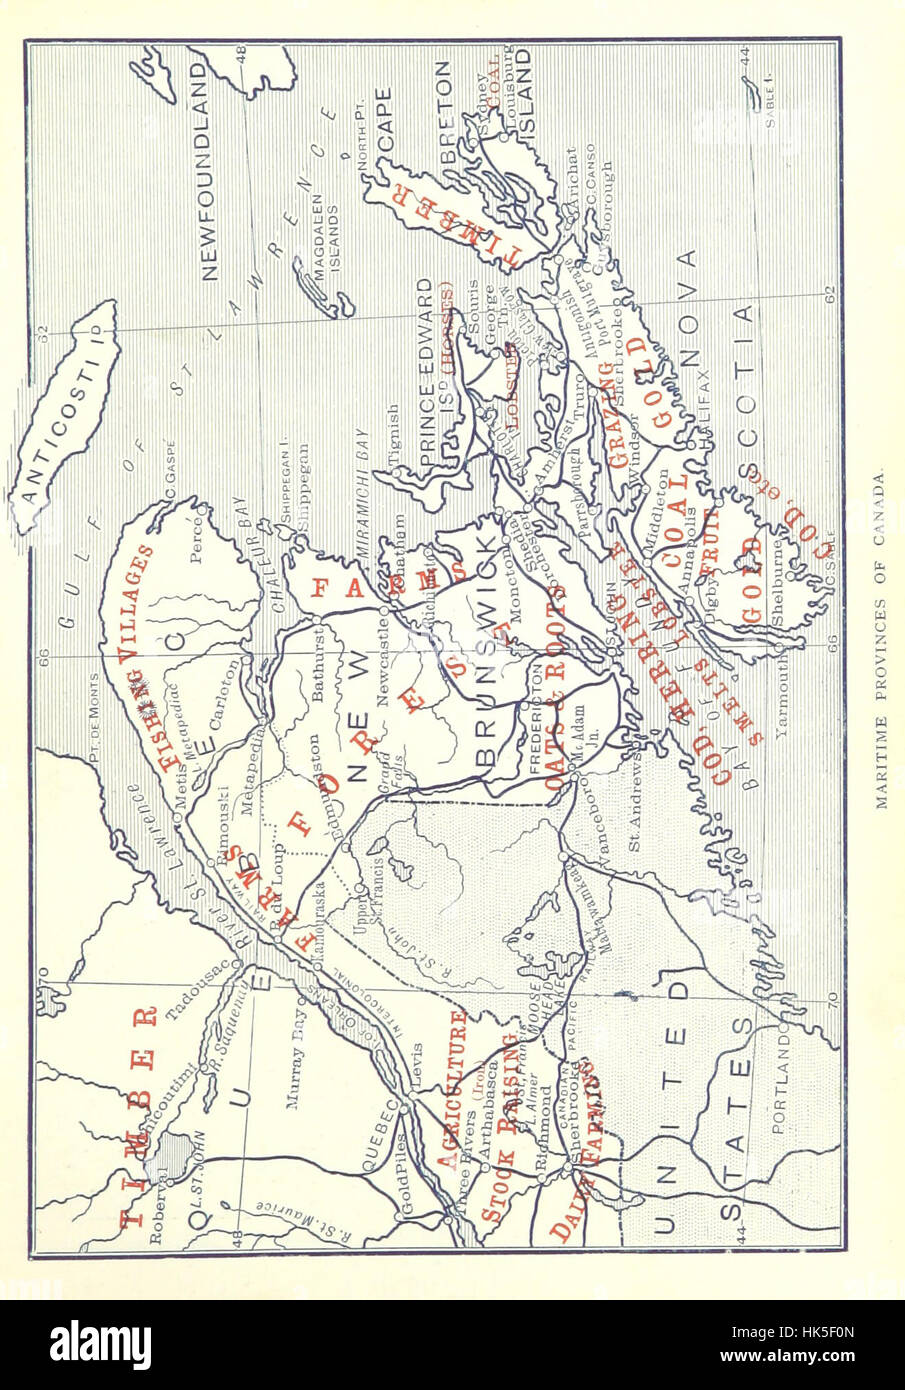 Pitman's Commercial Geography of the World Image taken from page 195 of 'Pitman's Commercial Stock Photo